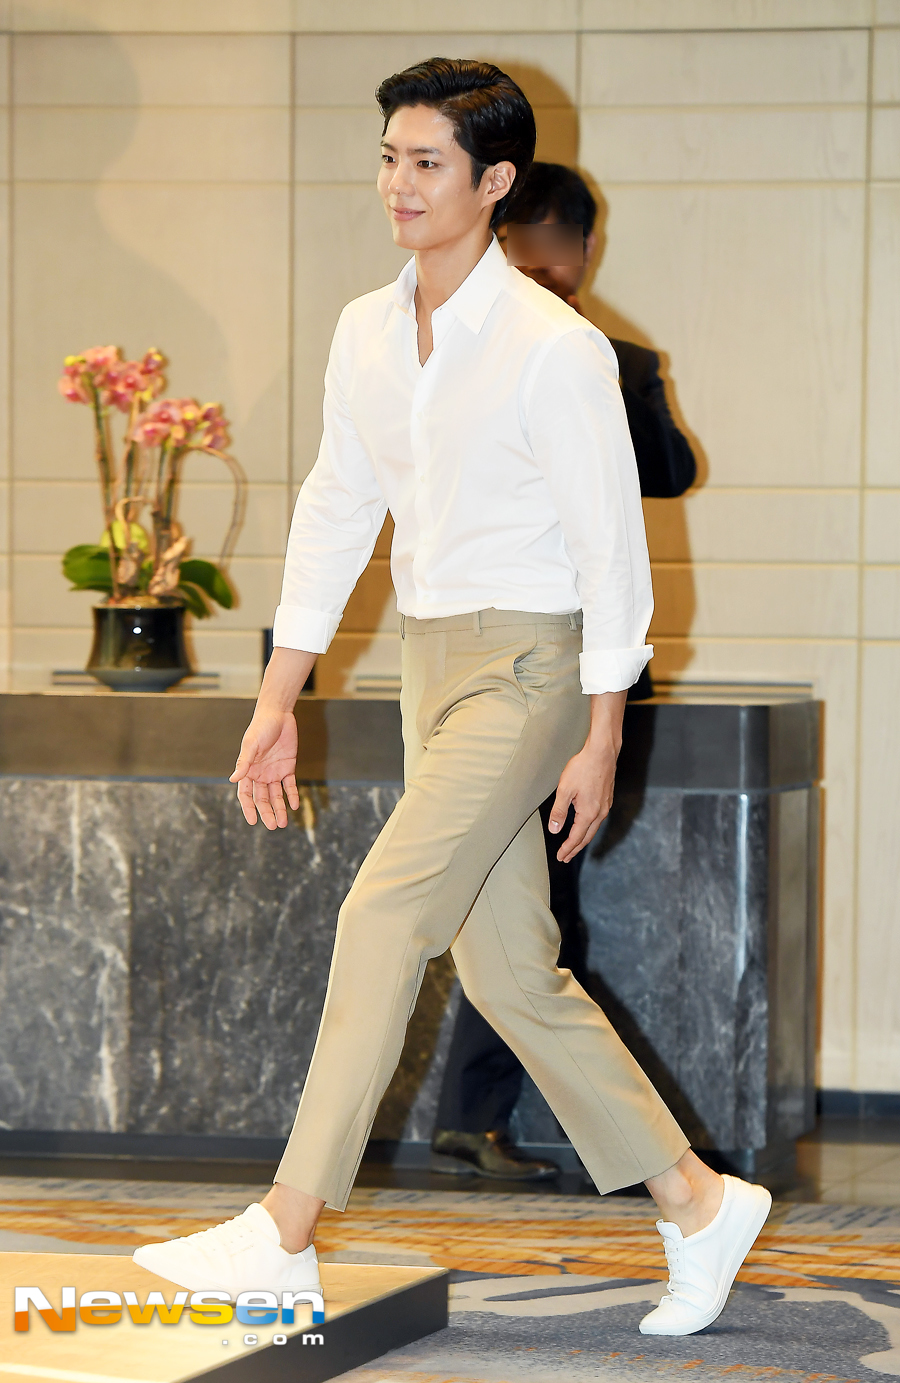 <p>Actor Park Bo-gum joined Chugai Travel on the launch of Winix tumble dryer launched in Seoul Gwanghwamun Four Seasons Hotel Grand Ballroom on September 11th morning.</p><p>This day Park Bo-gum is entering.</p><p>Meanwhile, Park Bo - gum breathes with Song Hye Kyo at the tvN water drama Boyfriend ahead of the November broadcast.</p>